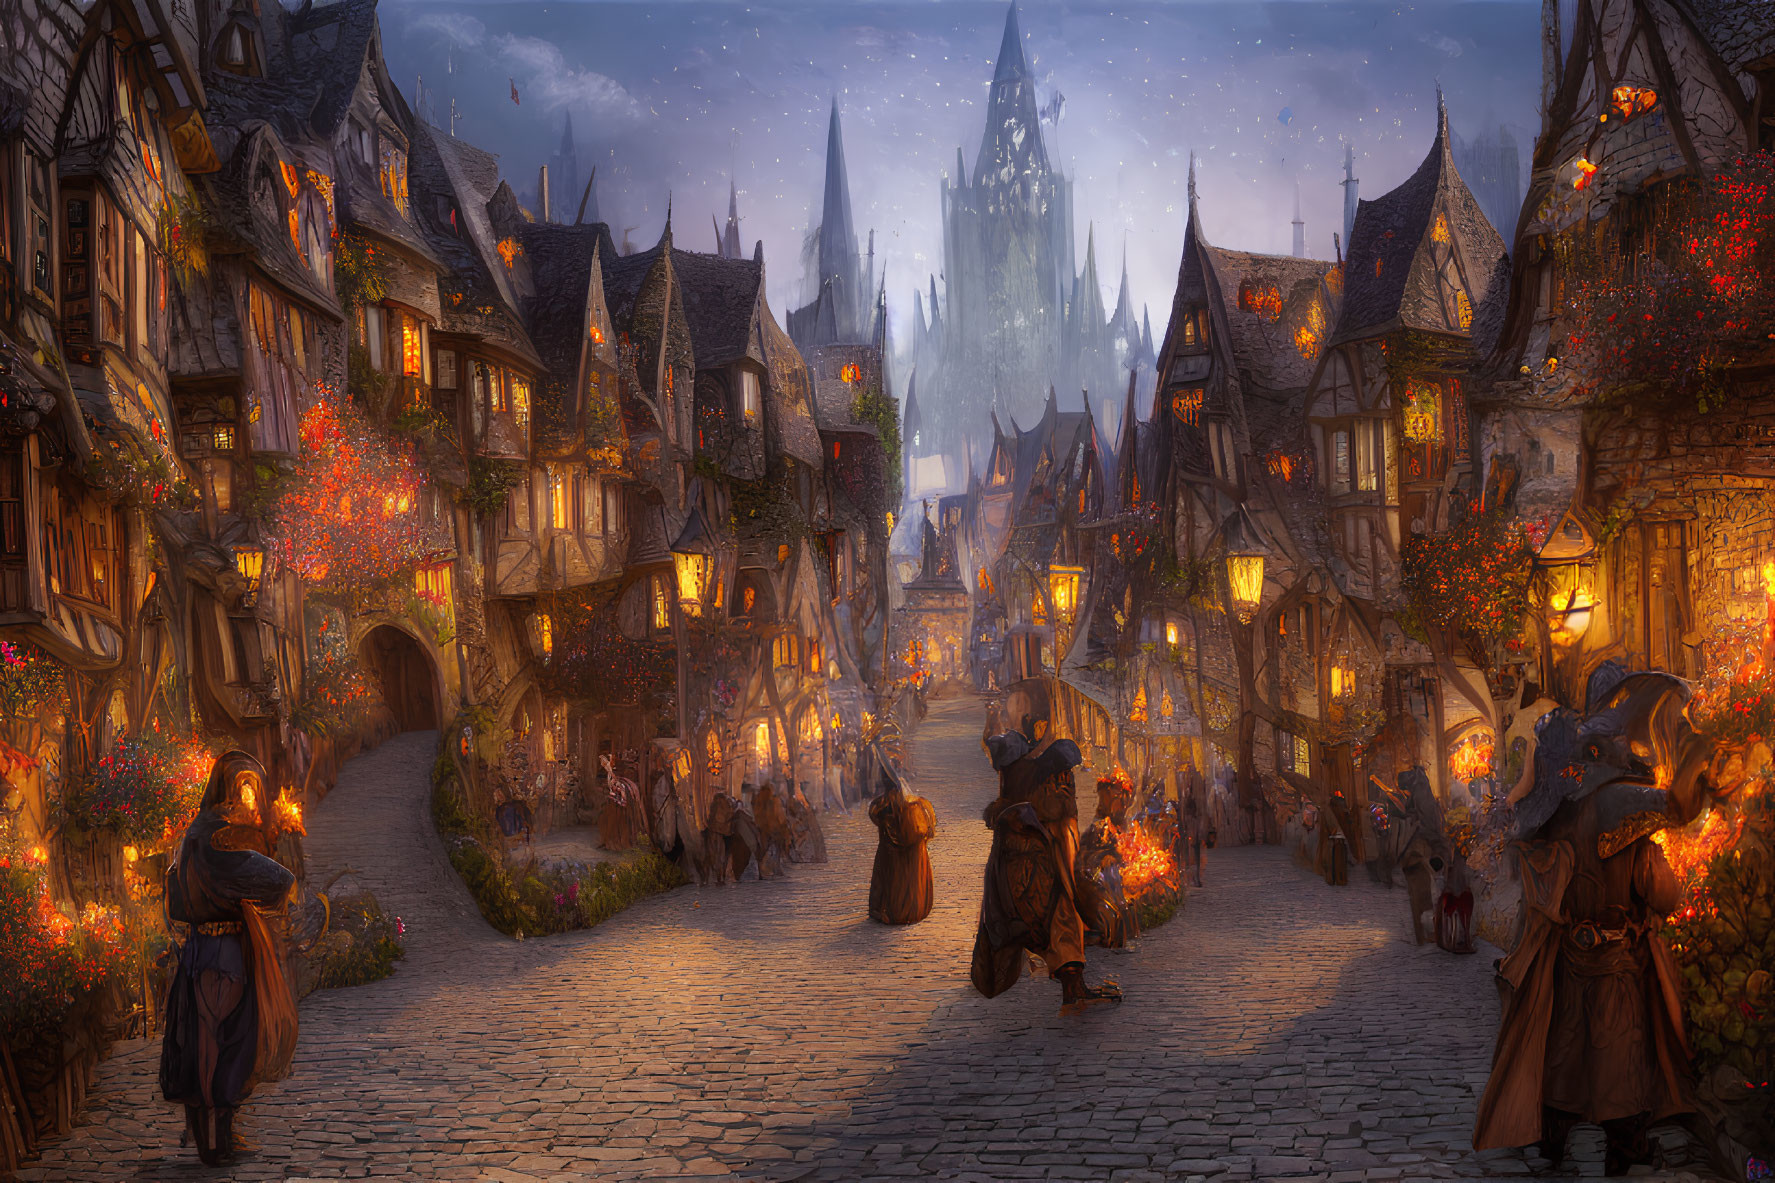 Medieval village with cobblestone streets, townsfolk, and castle in foggy twilight